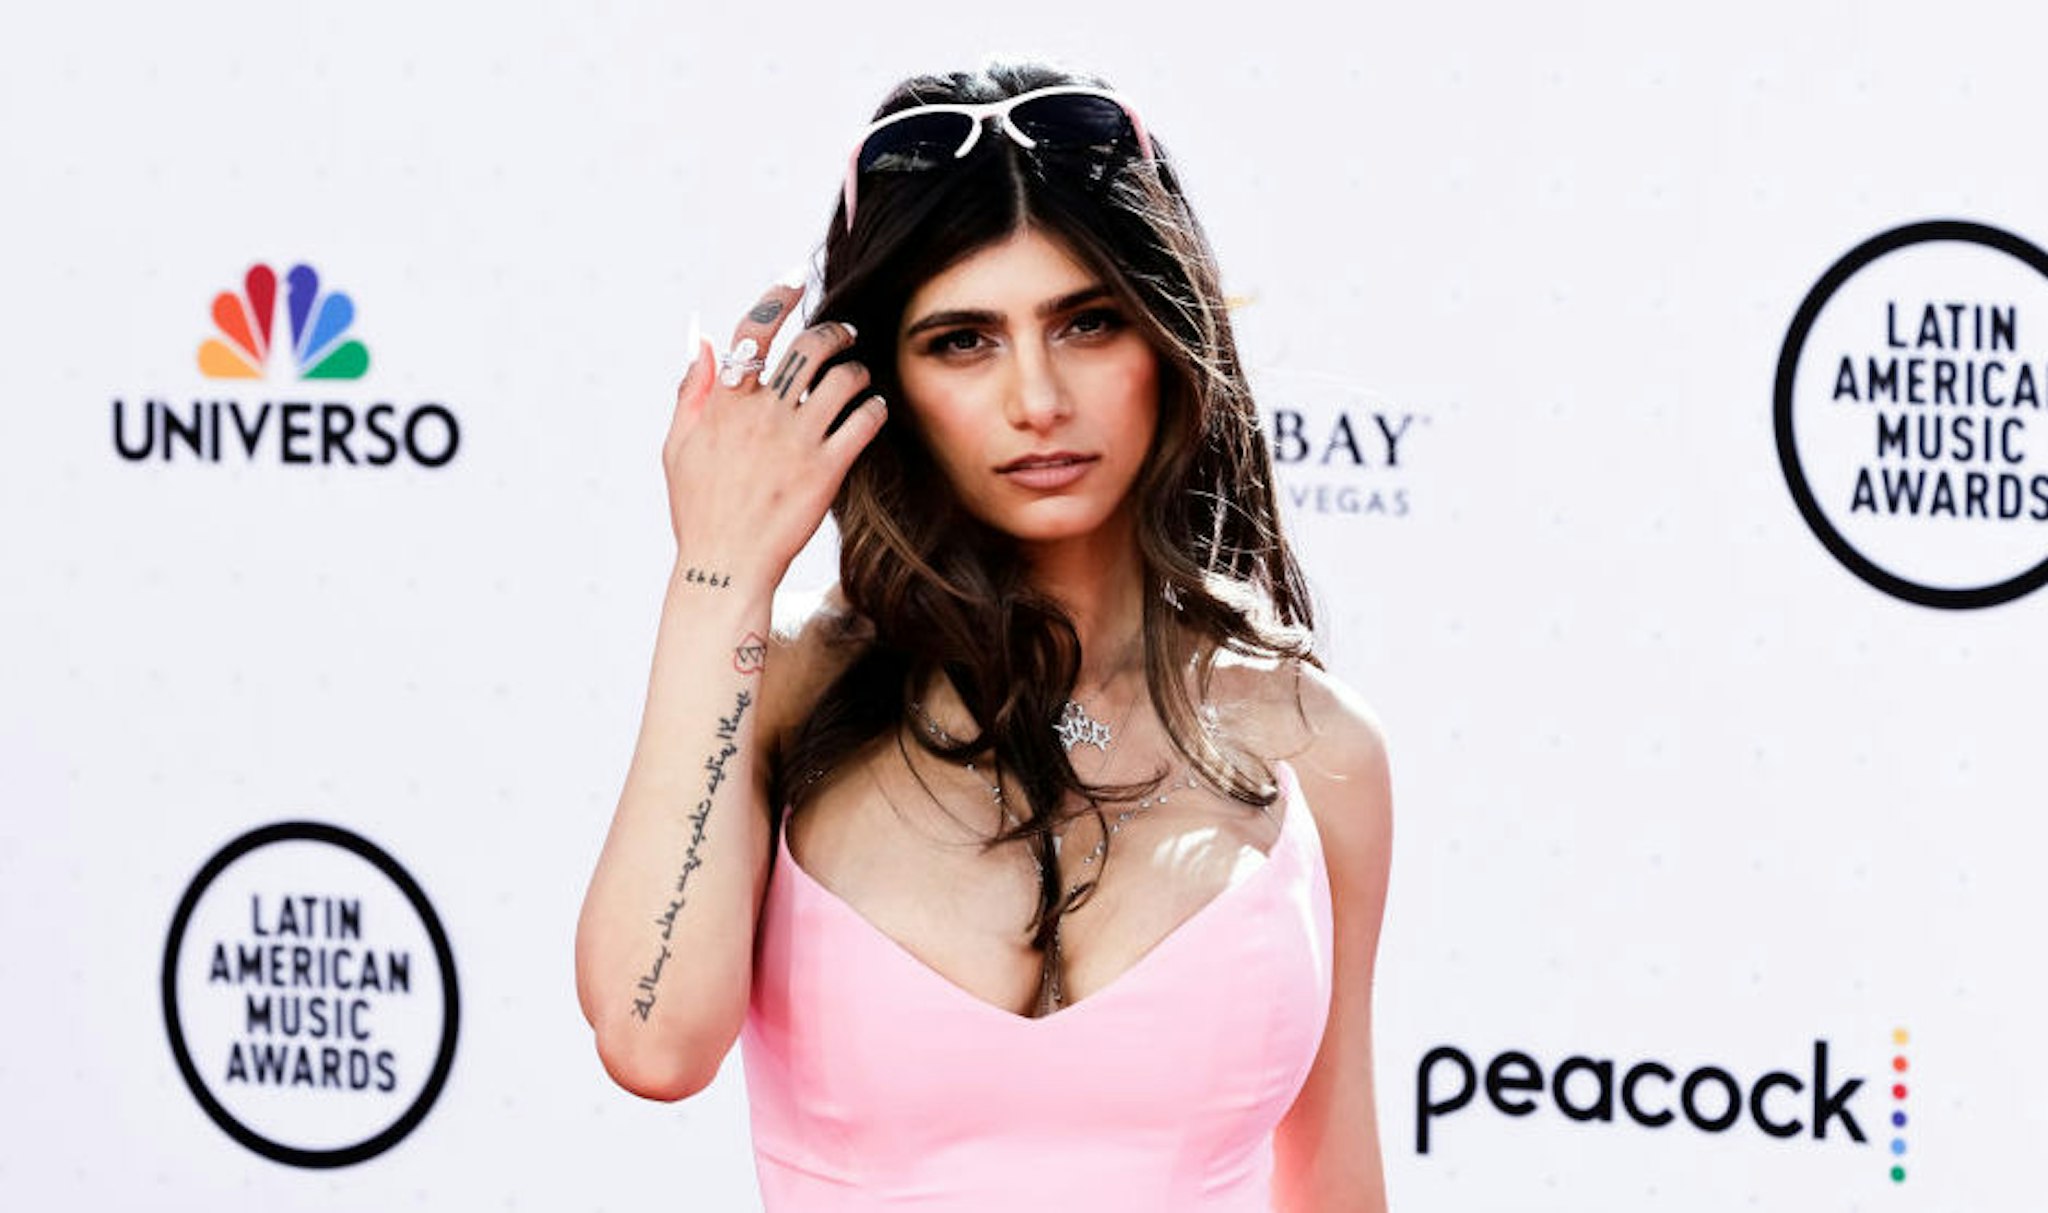 Mia Khalifa arrives at the 2022 Latin American Music Awards at Michelob ULTRA Arena on April 21, 2022 in Las Vegas, Nevada.